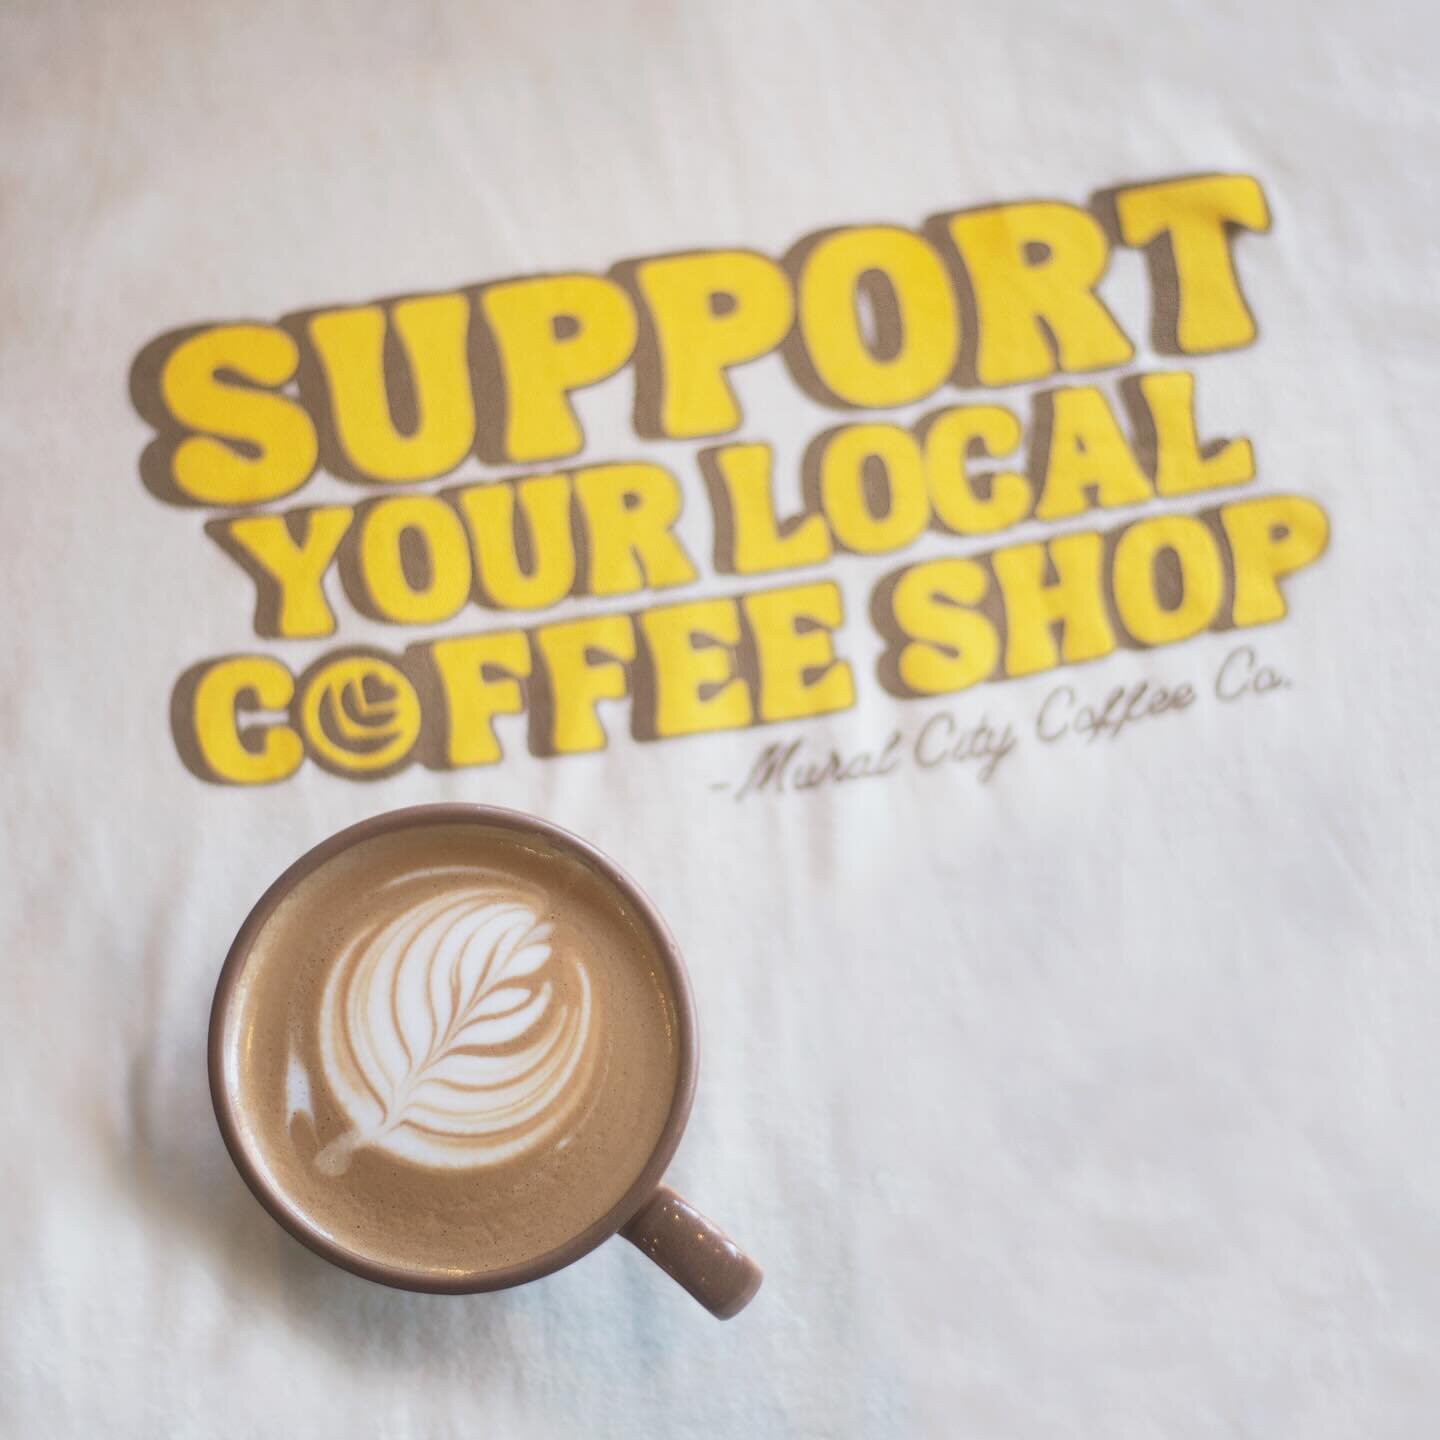 Support your local coffee shop by grabbing a drink, a bag of coffee, or even this shirt! 😘☕️❤️
&bull;
&bull;
&bull;
Local Support Credits:
📸: Hollie Walden Photography
Design: In-House 😎
Shirt Printing: Honey Bee Tees🐝
&bull;
&bull;
&bull;
#dotha